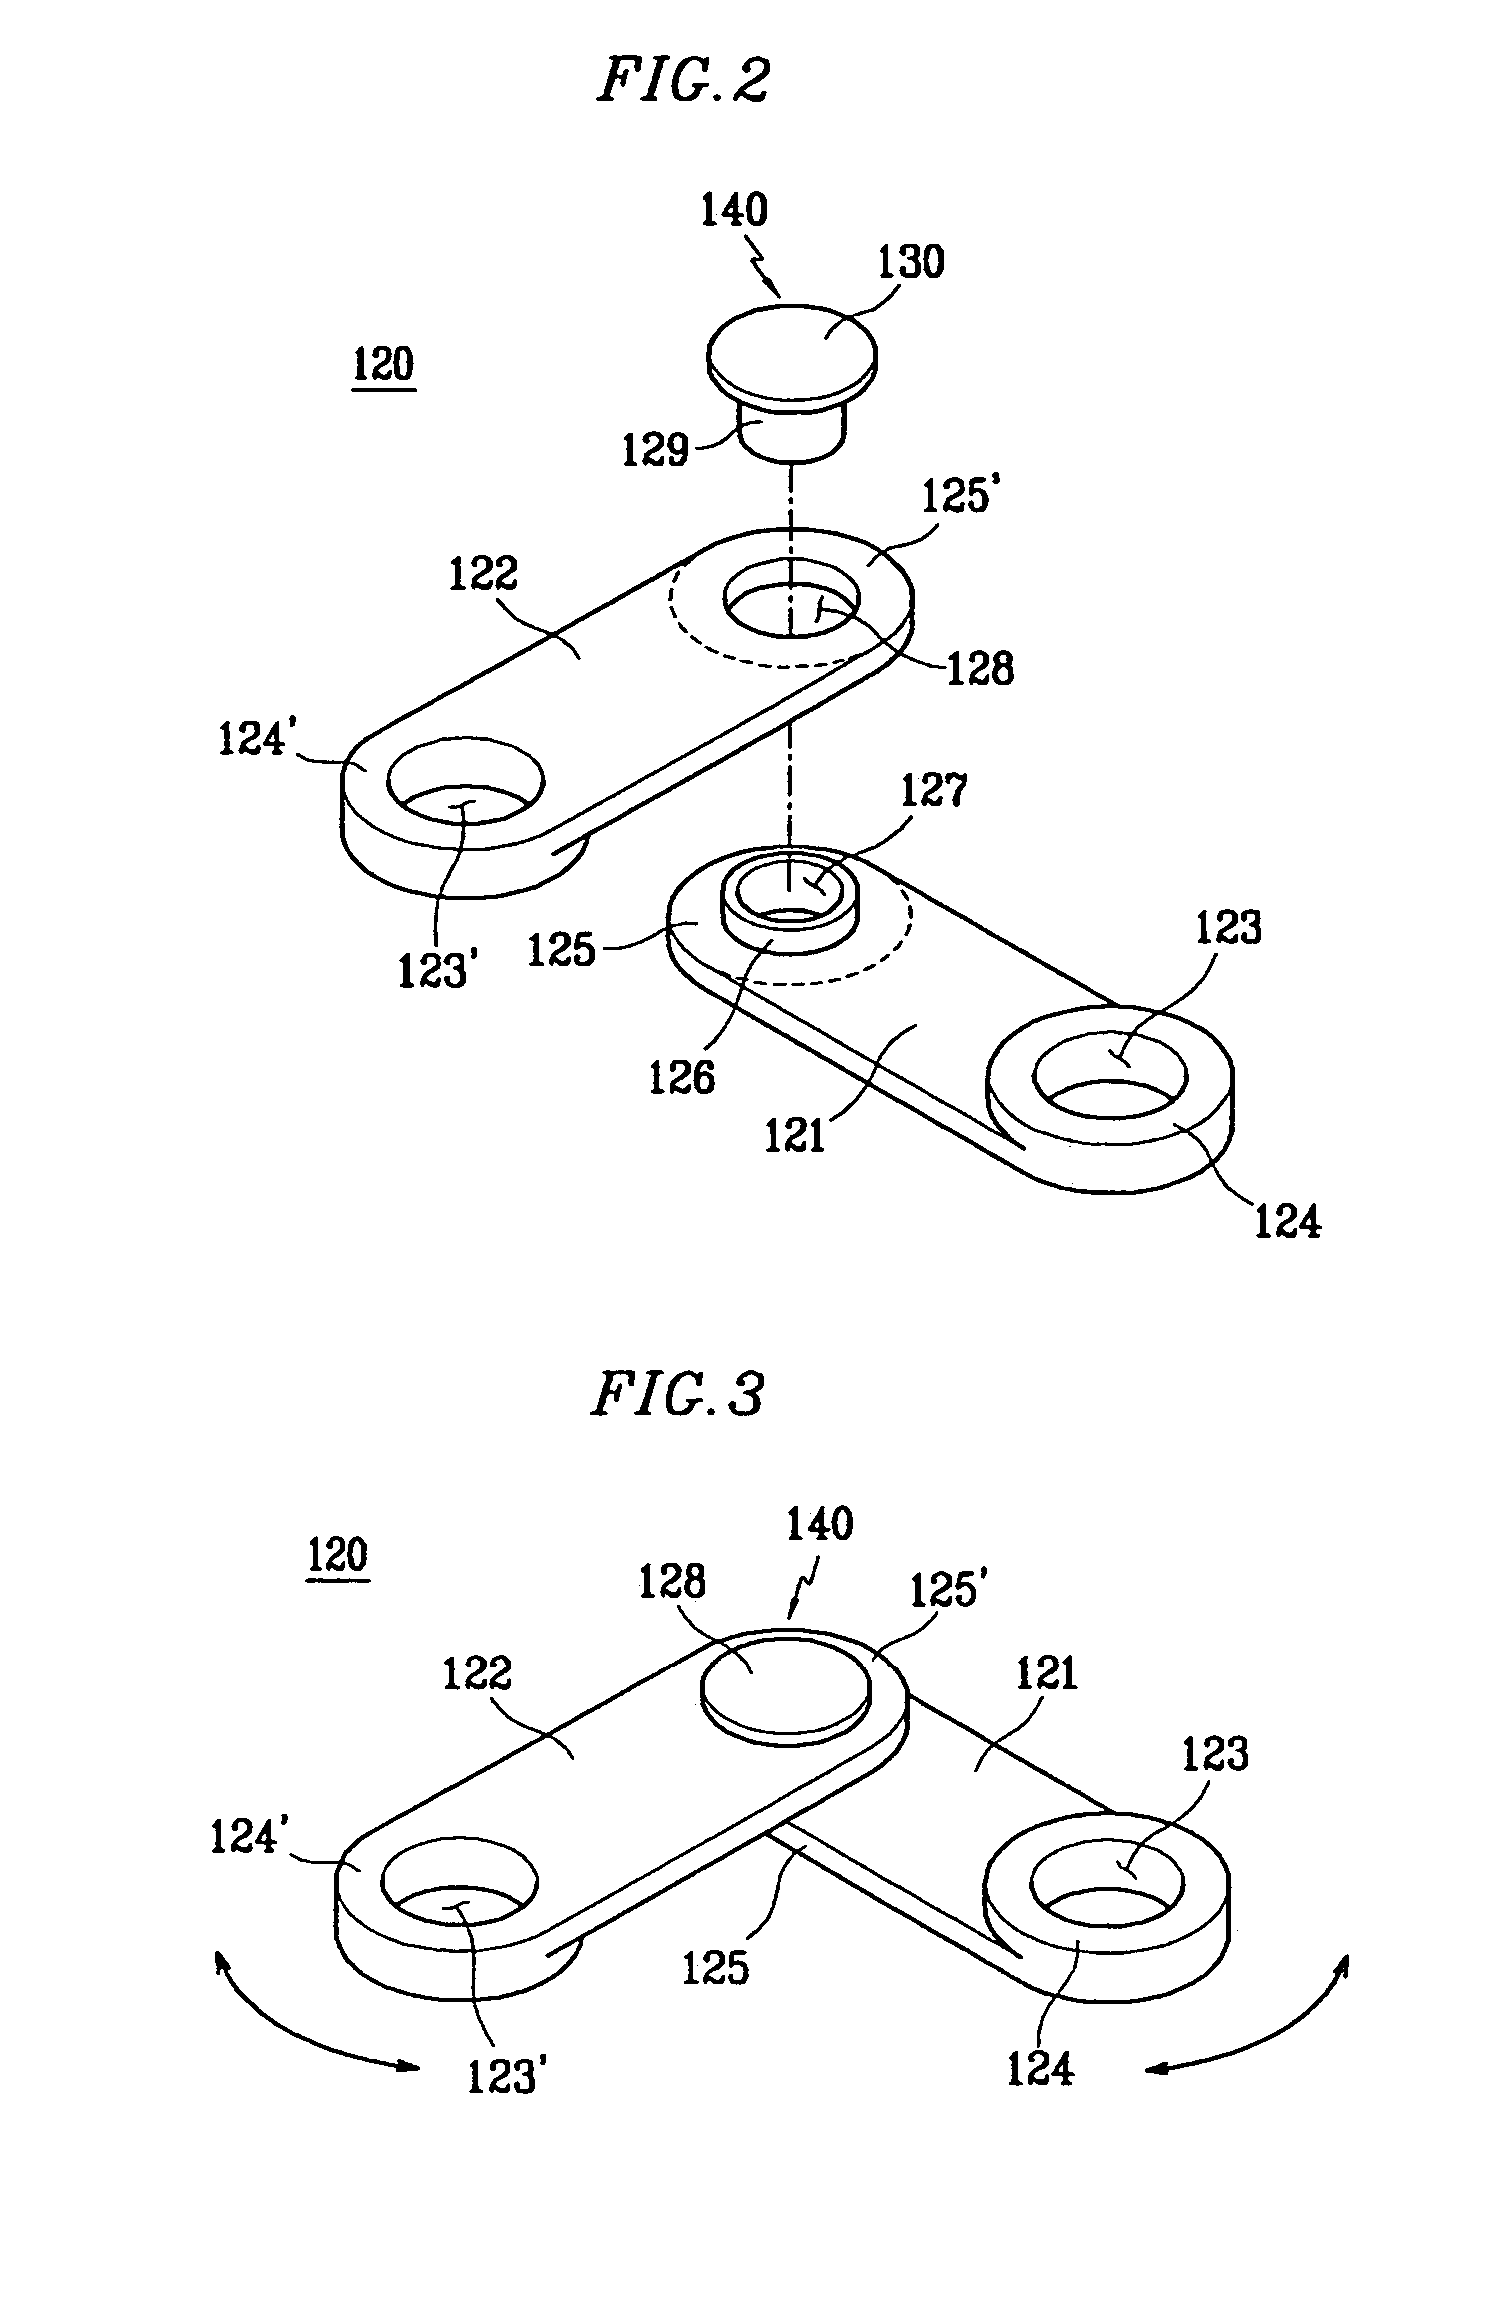 Modular battery with connector interconnecting terminals of adjacent unit cells